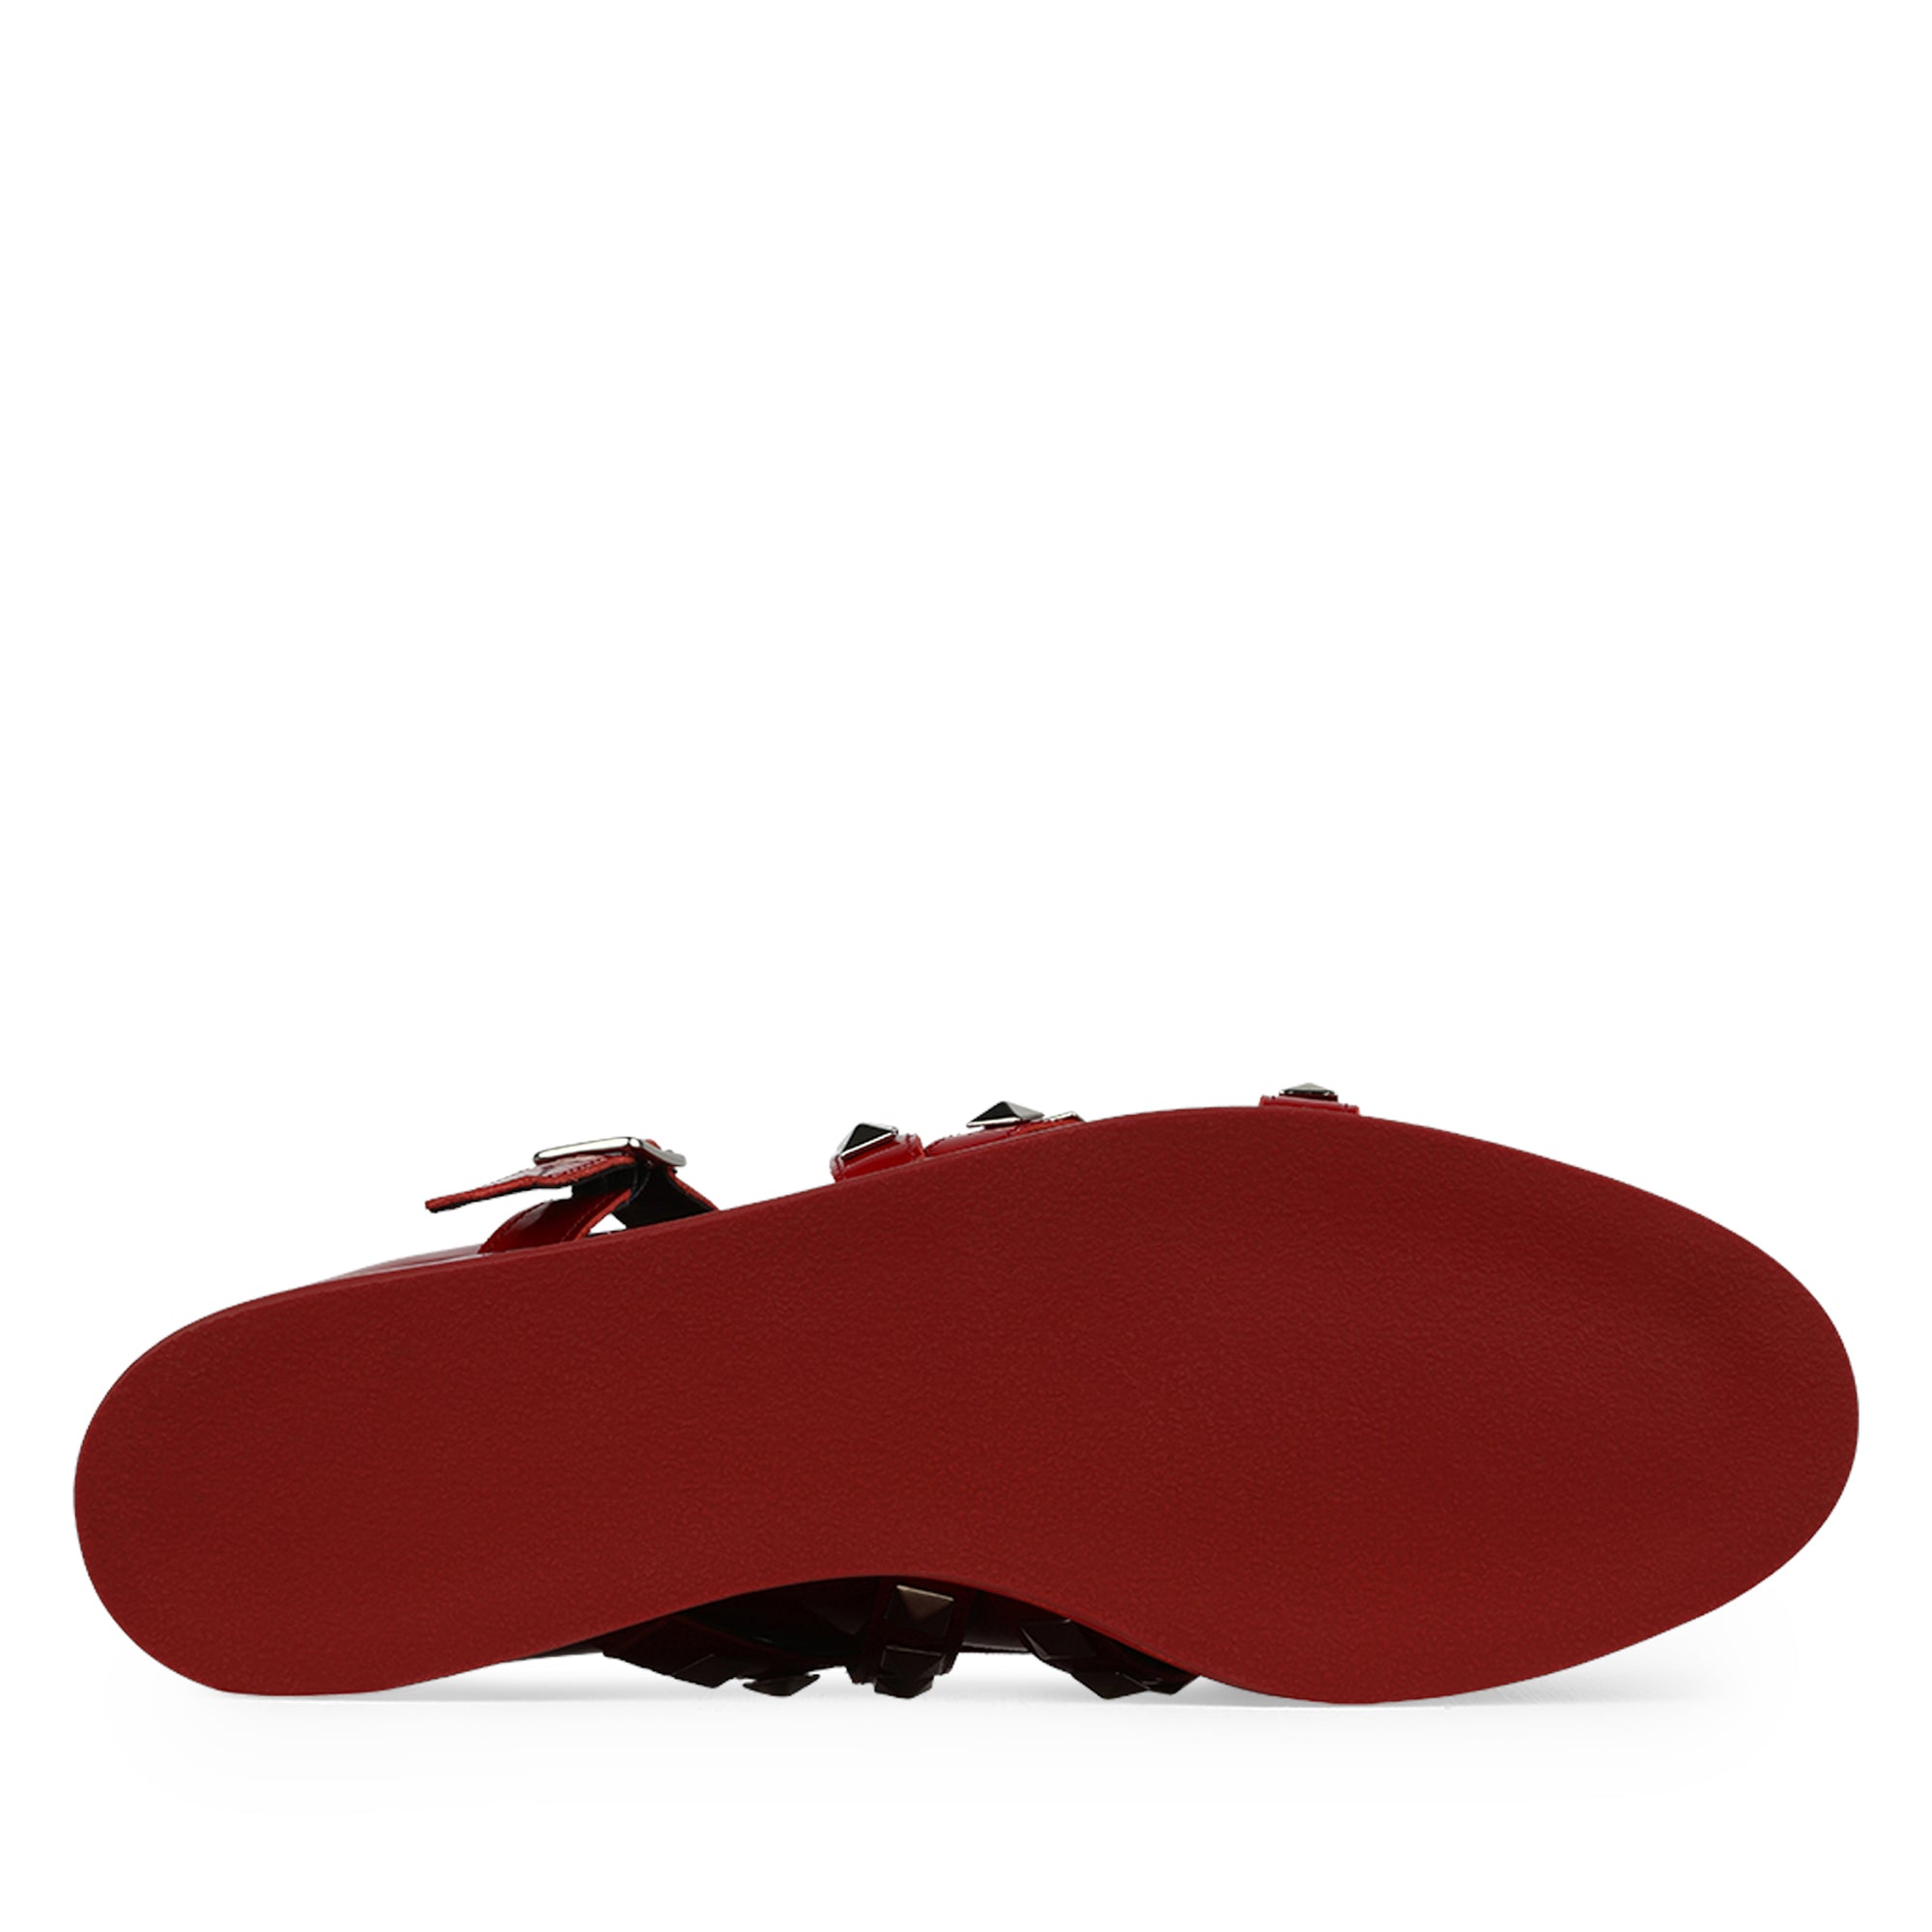 Noir Kei Ninomiya -  Repetto Platform Mary Janes With Ankle Strap - (Red) view 4